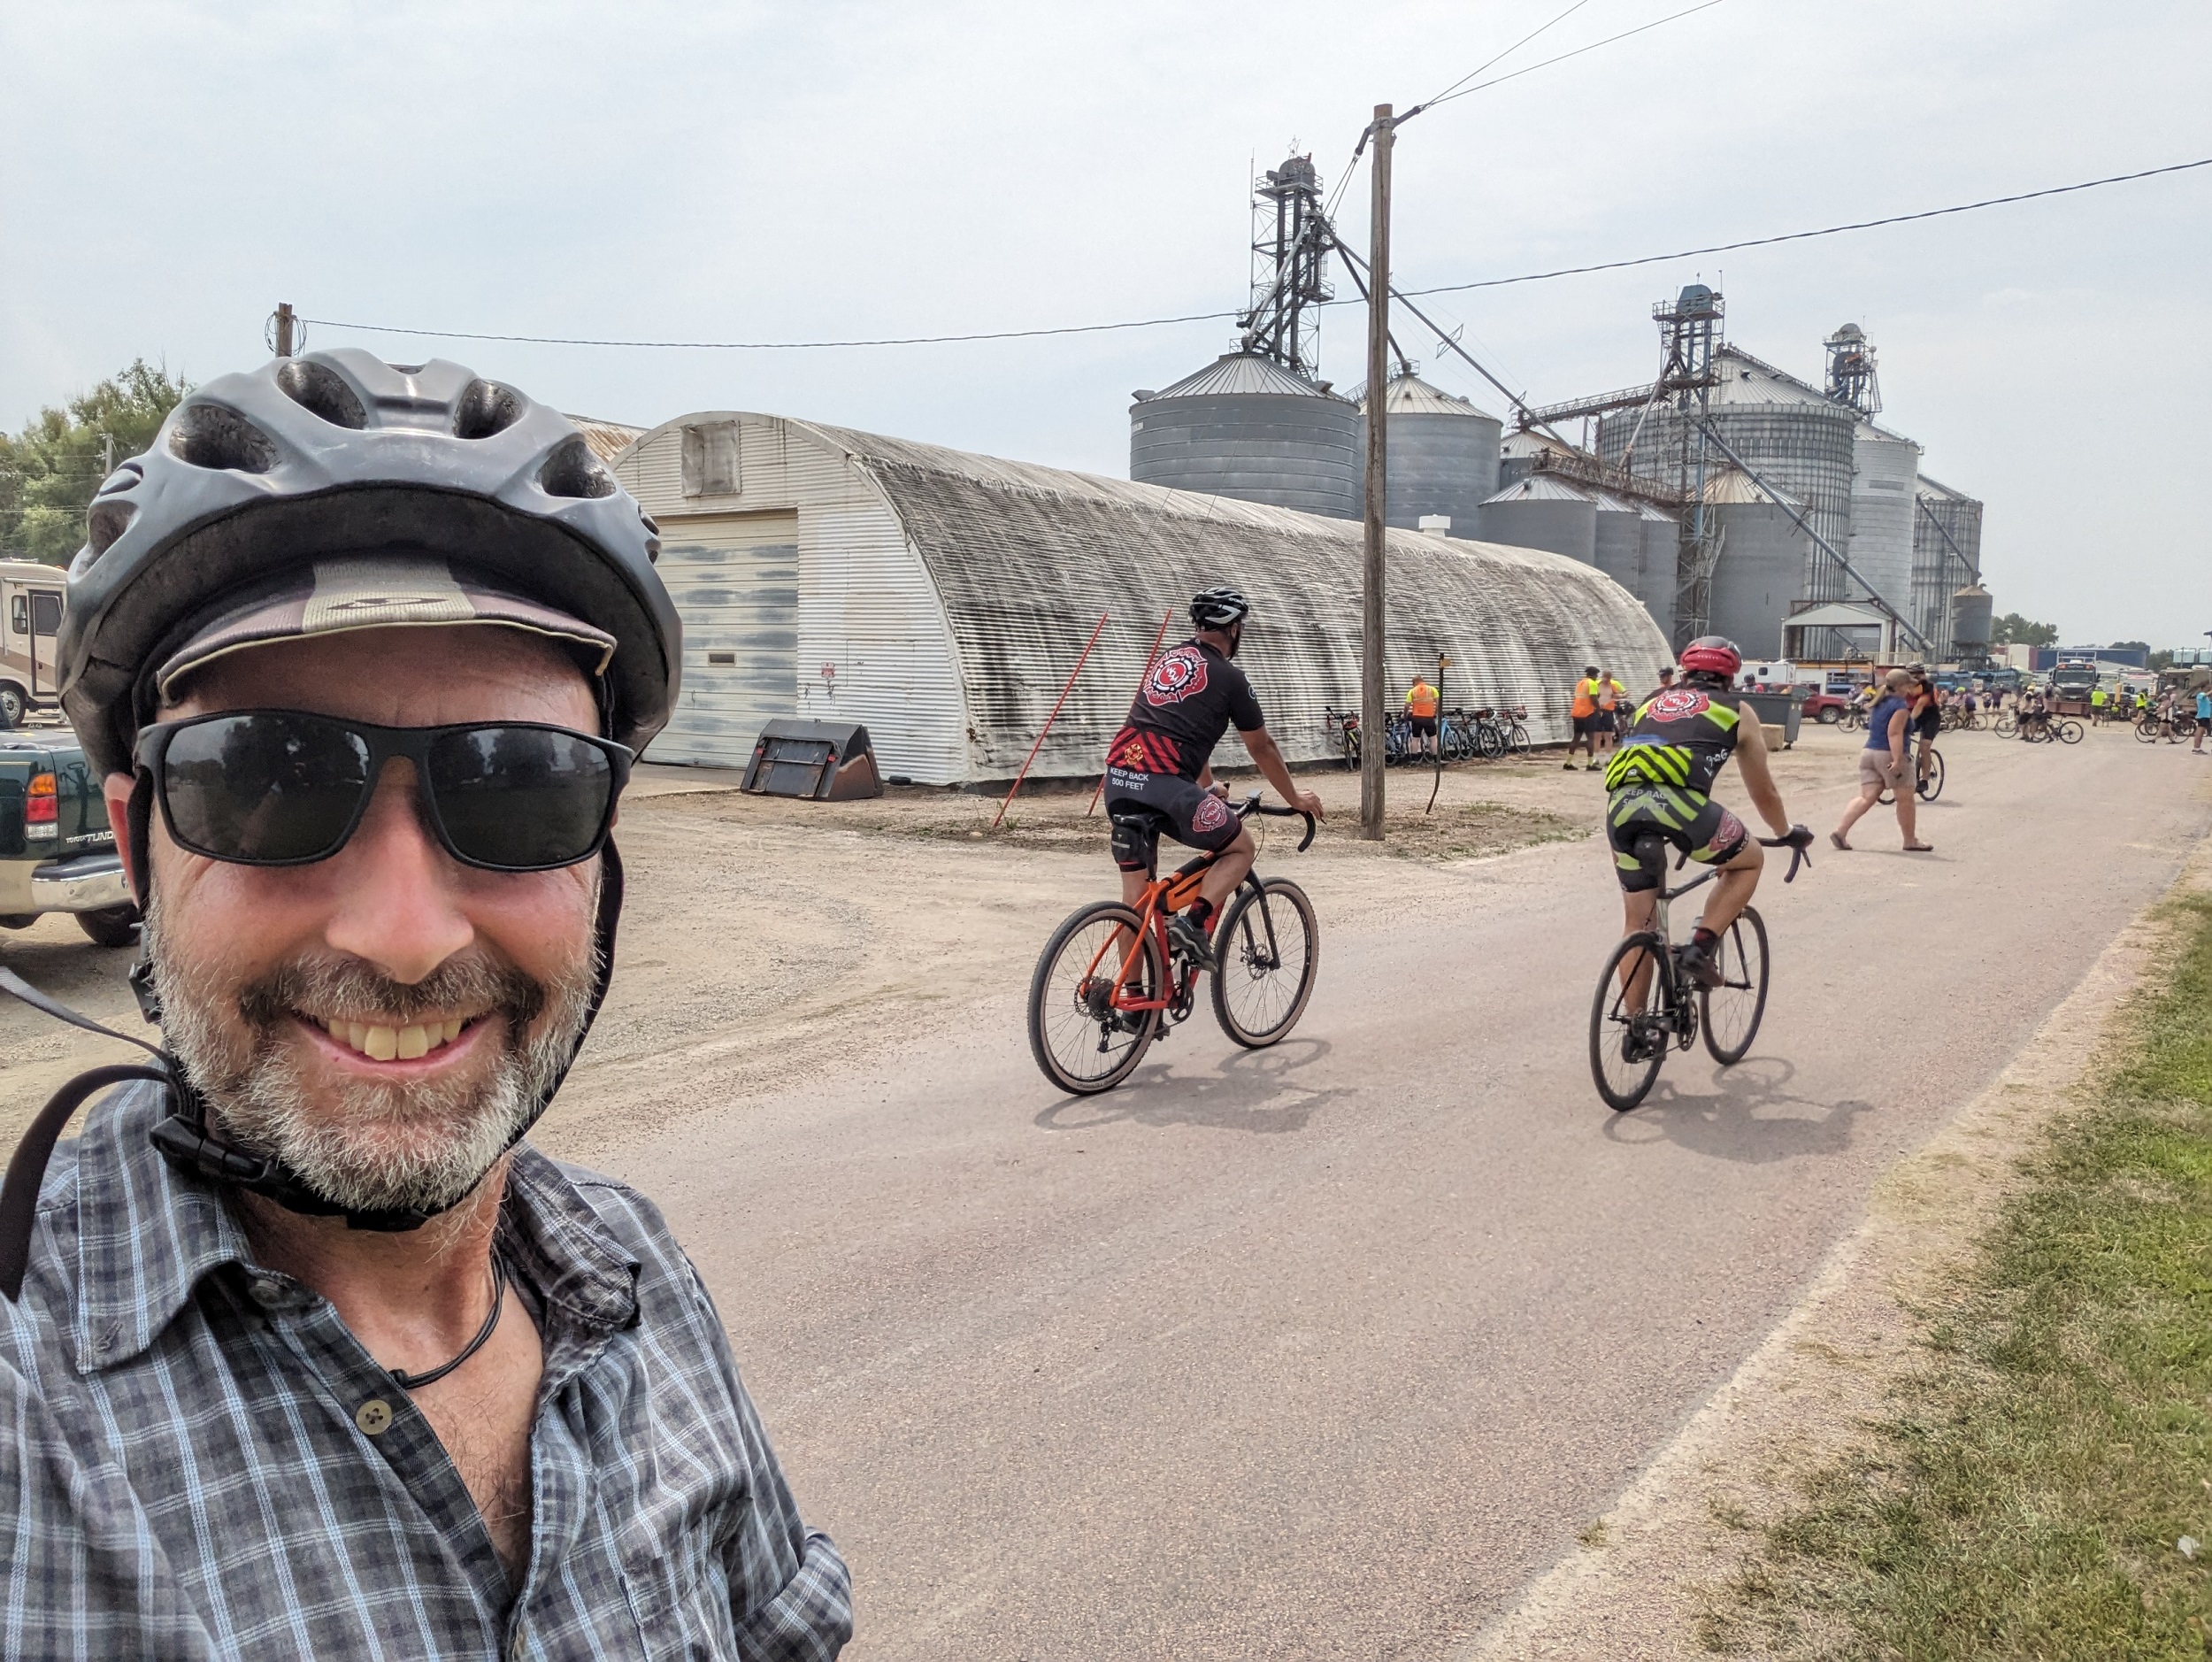 Me looking at the camera with grain facilities and cyclists behind.